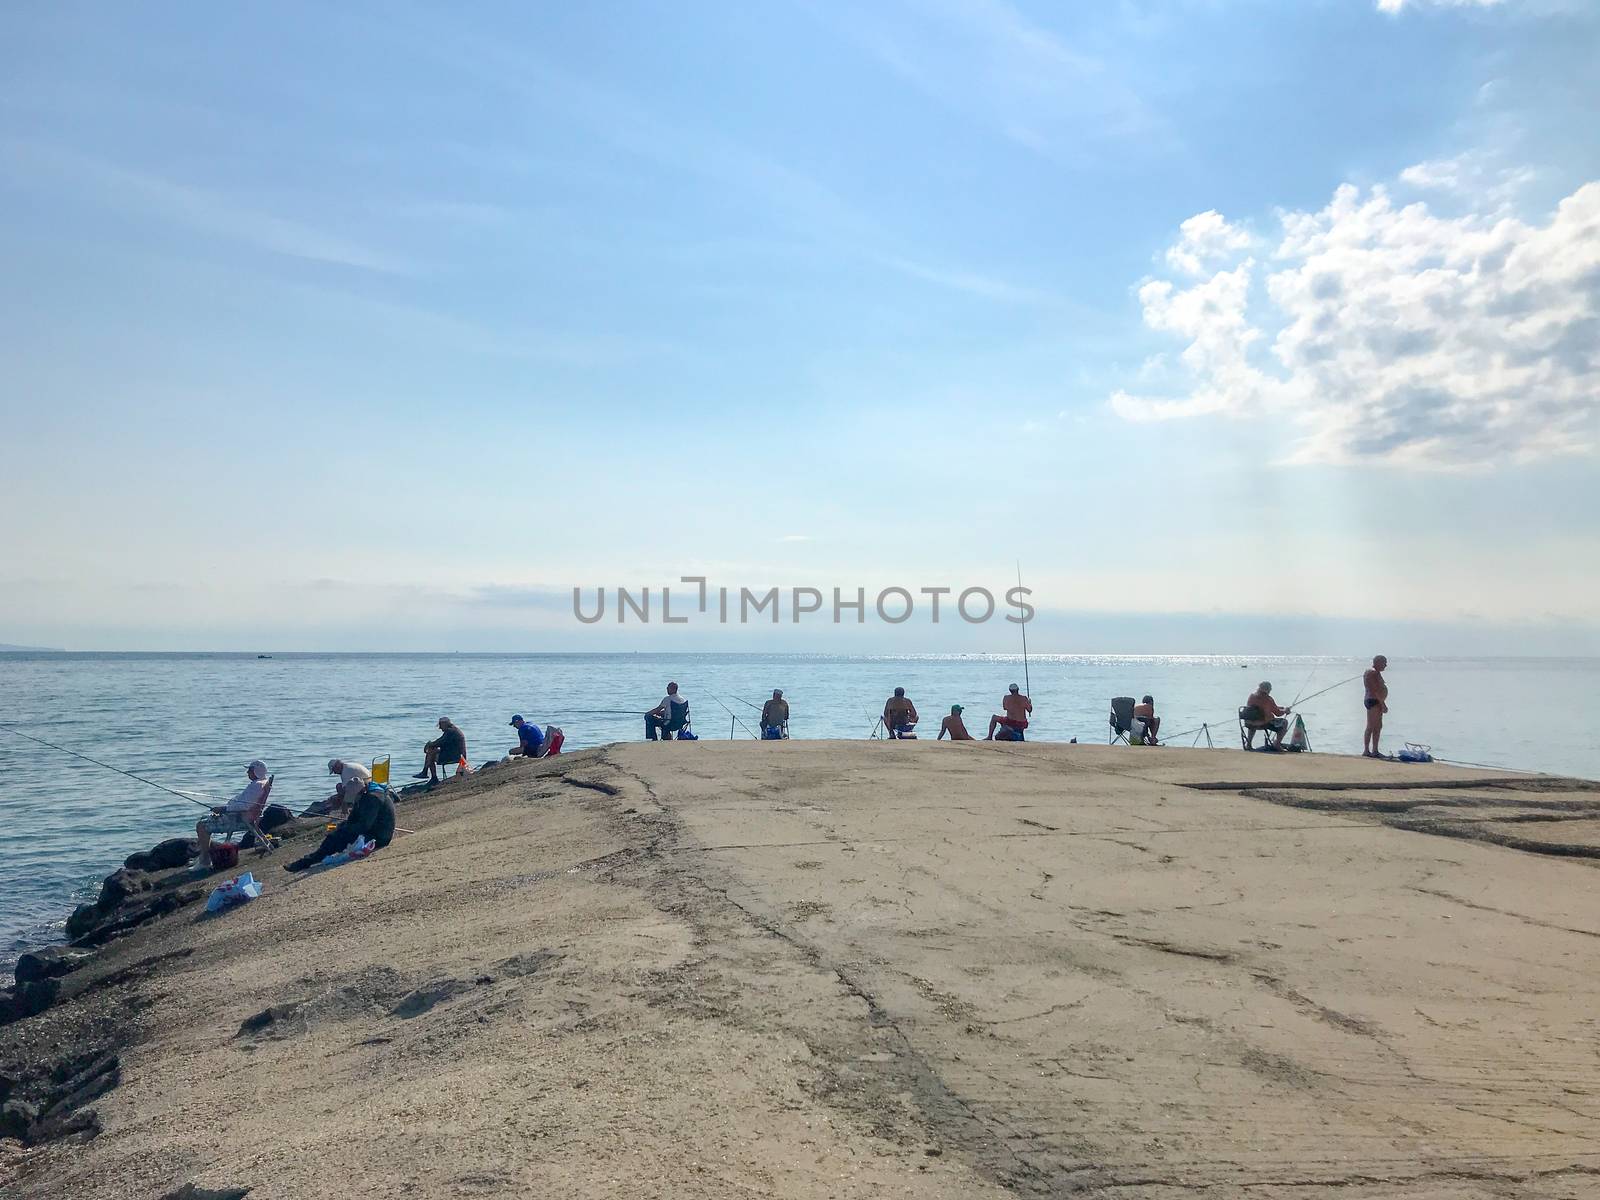 Pomorie, Bulgaria - July 16, 2019: Fishermen Hunt Fresh Fish Behind The Coasts Of The Sea Town.
 by nenovbrothers